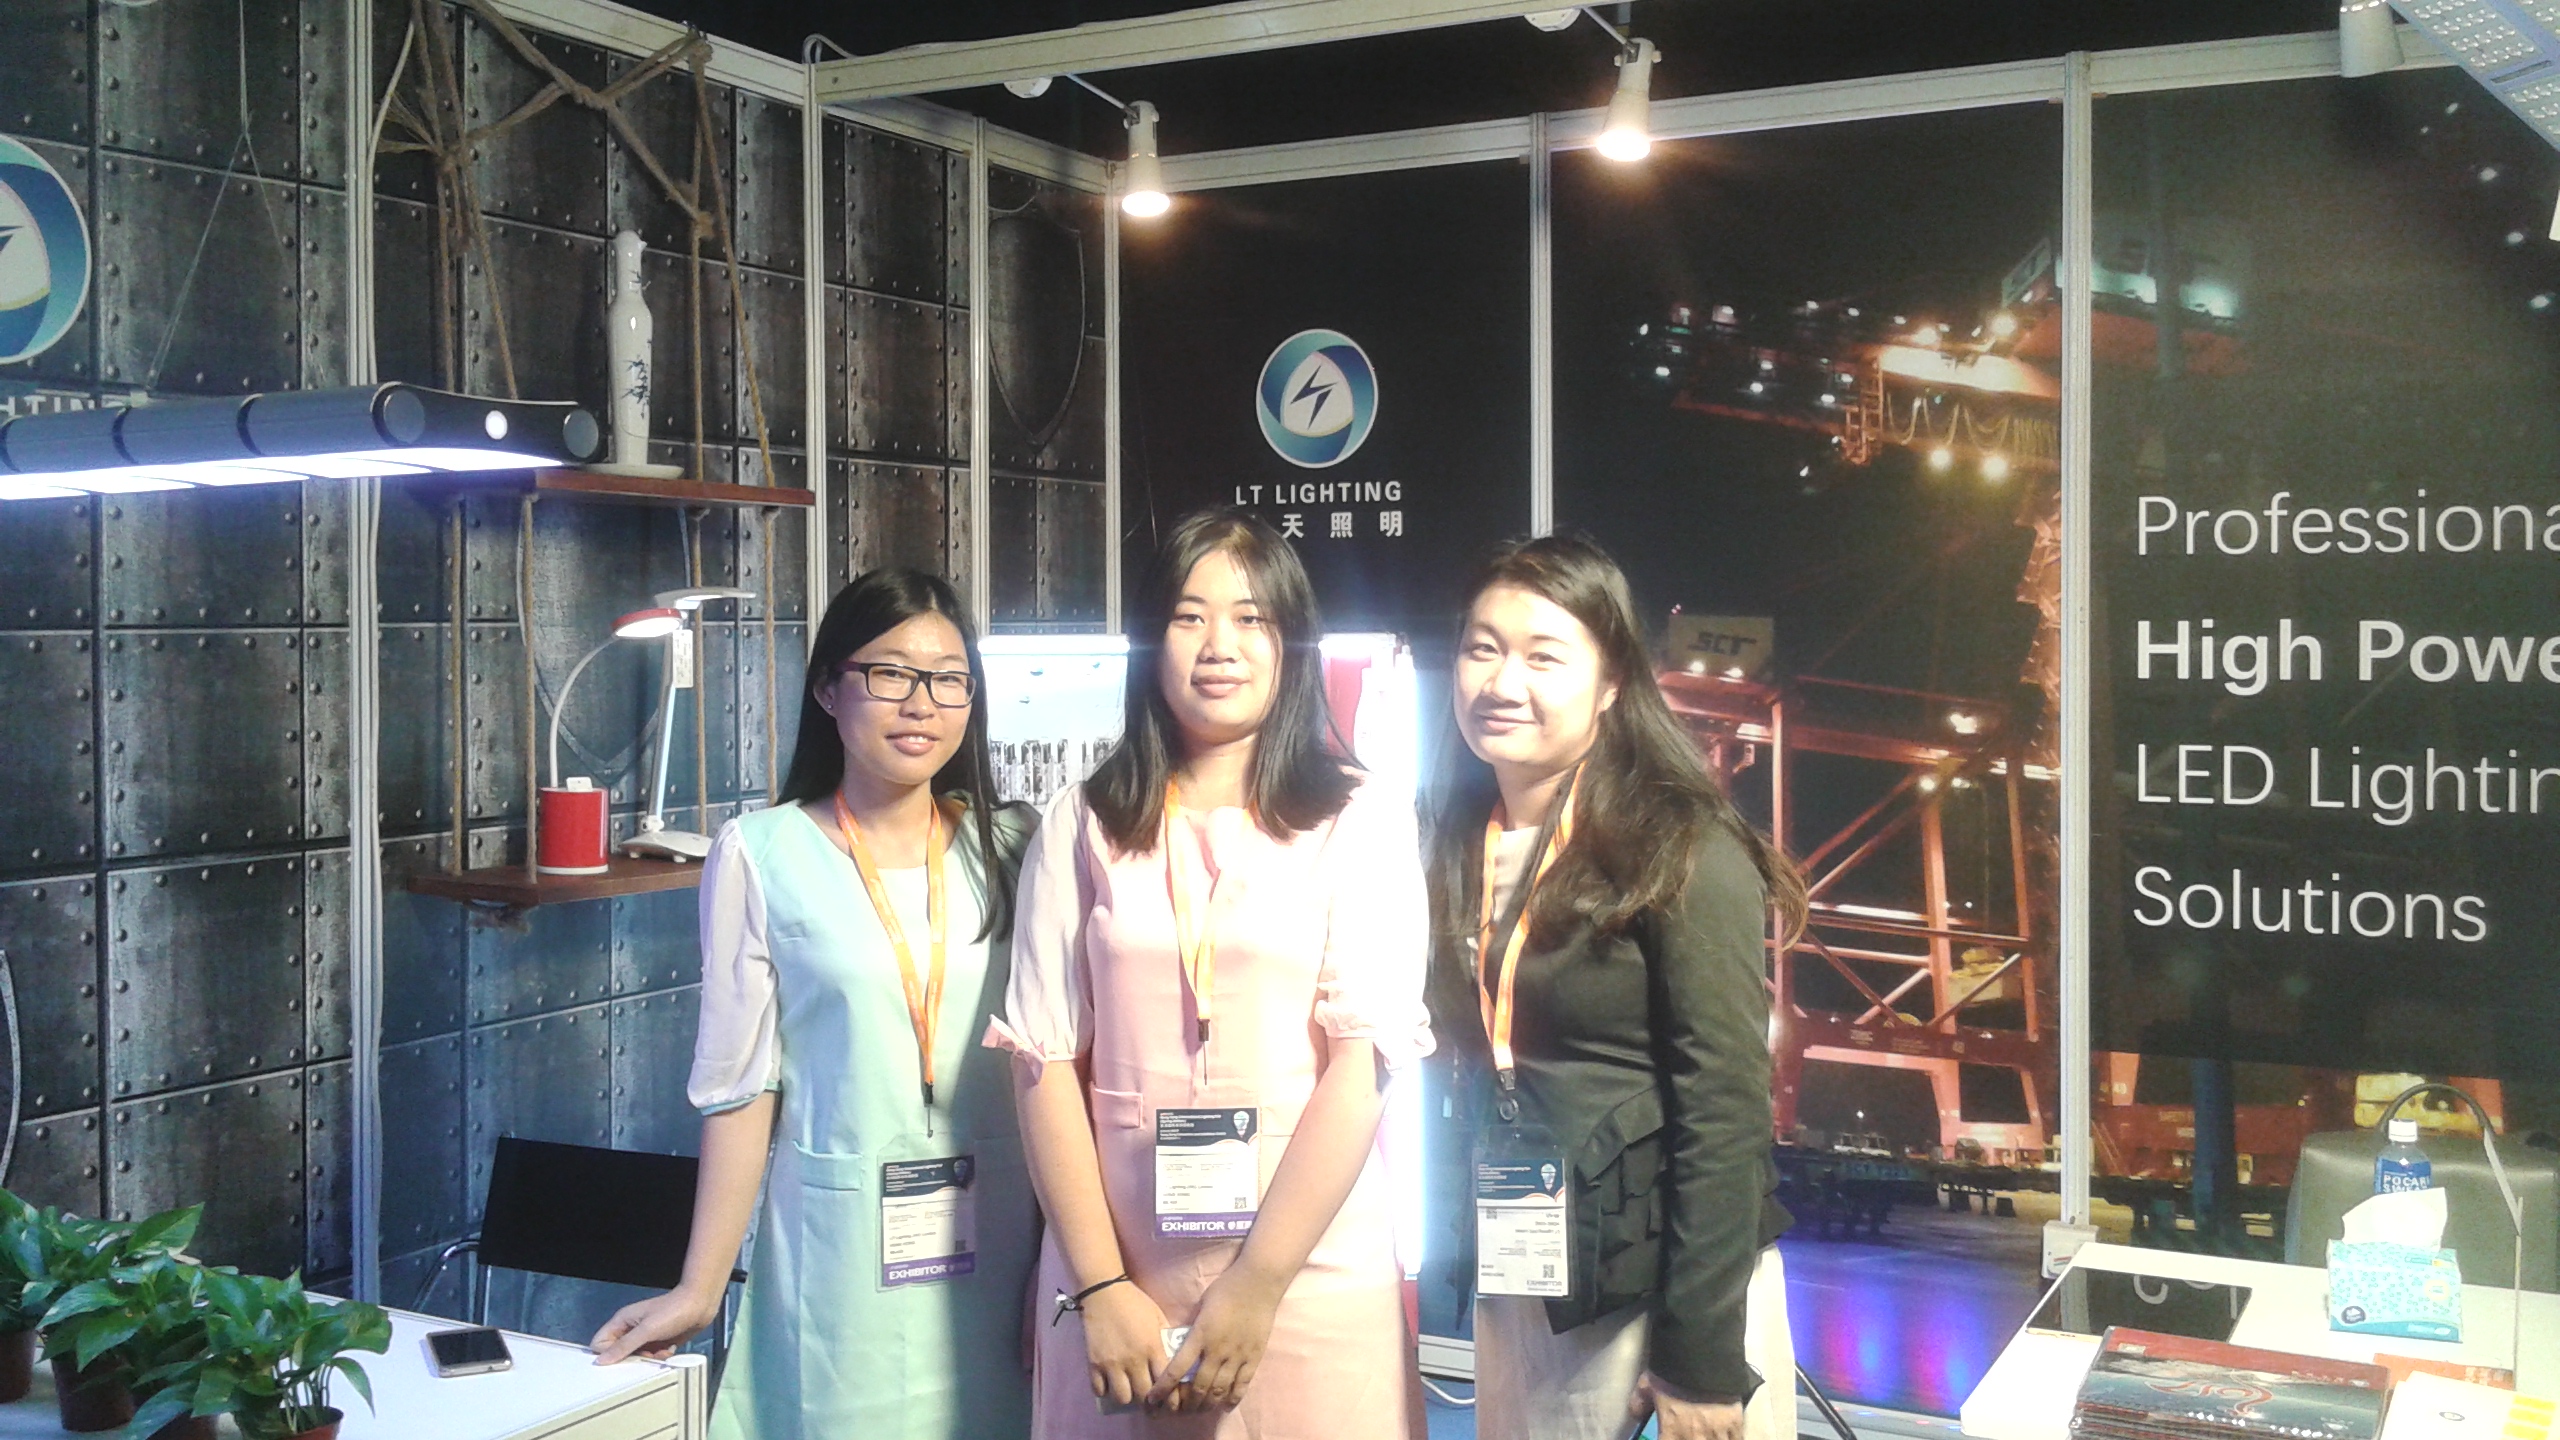 Welcoming visitors to our booth at the 2016 Hong Kong Lighting Fair